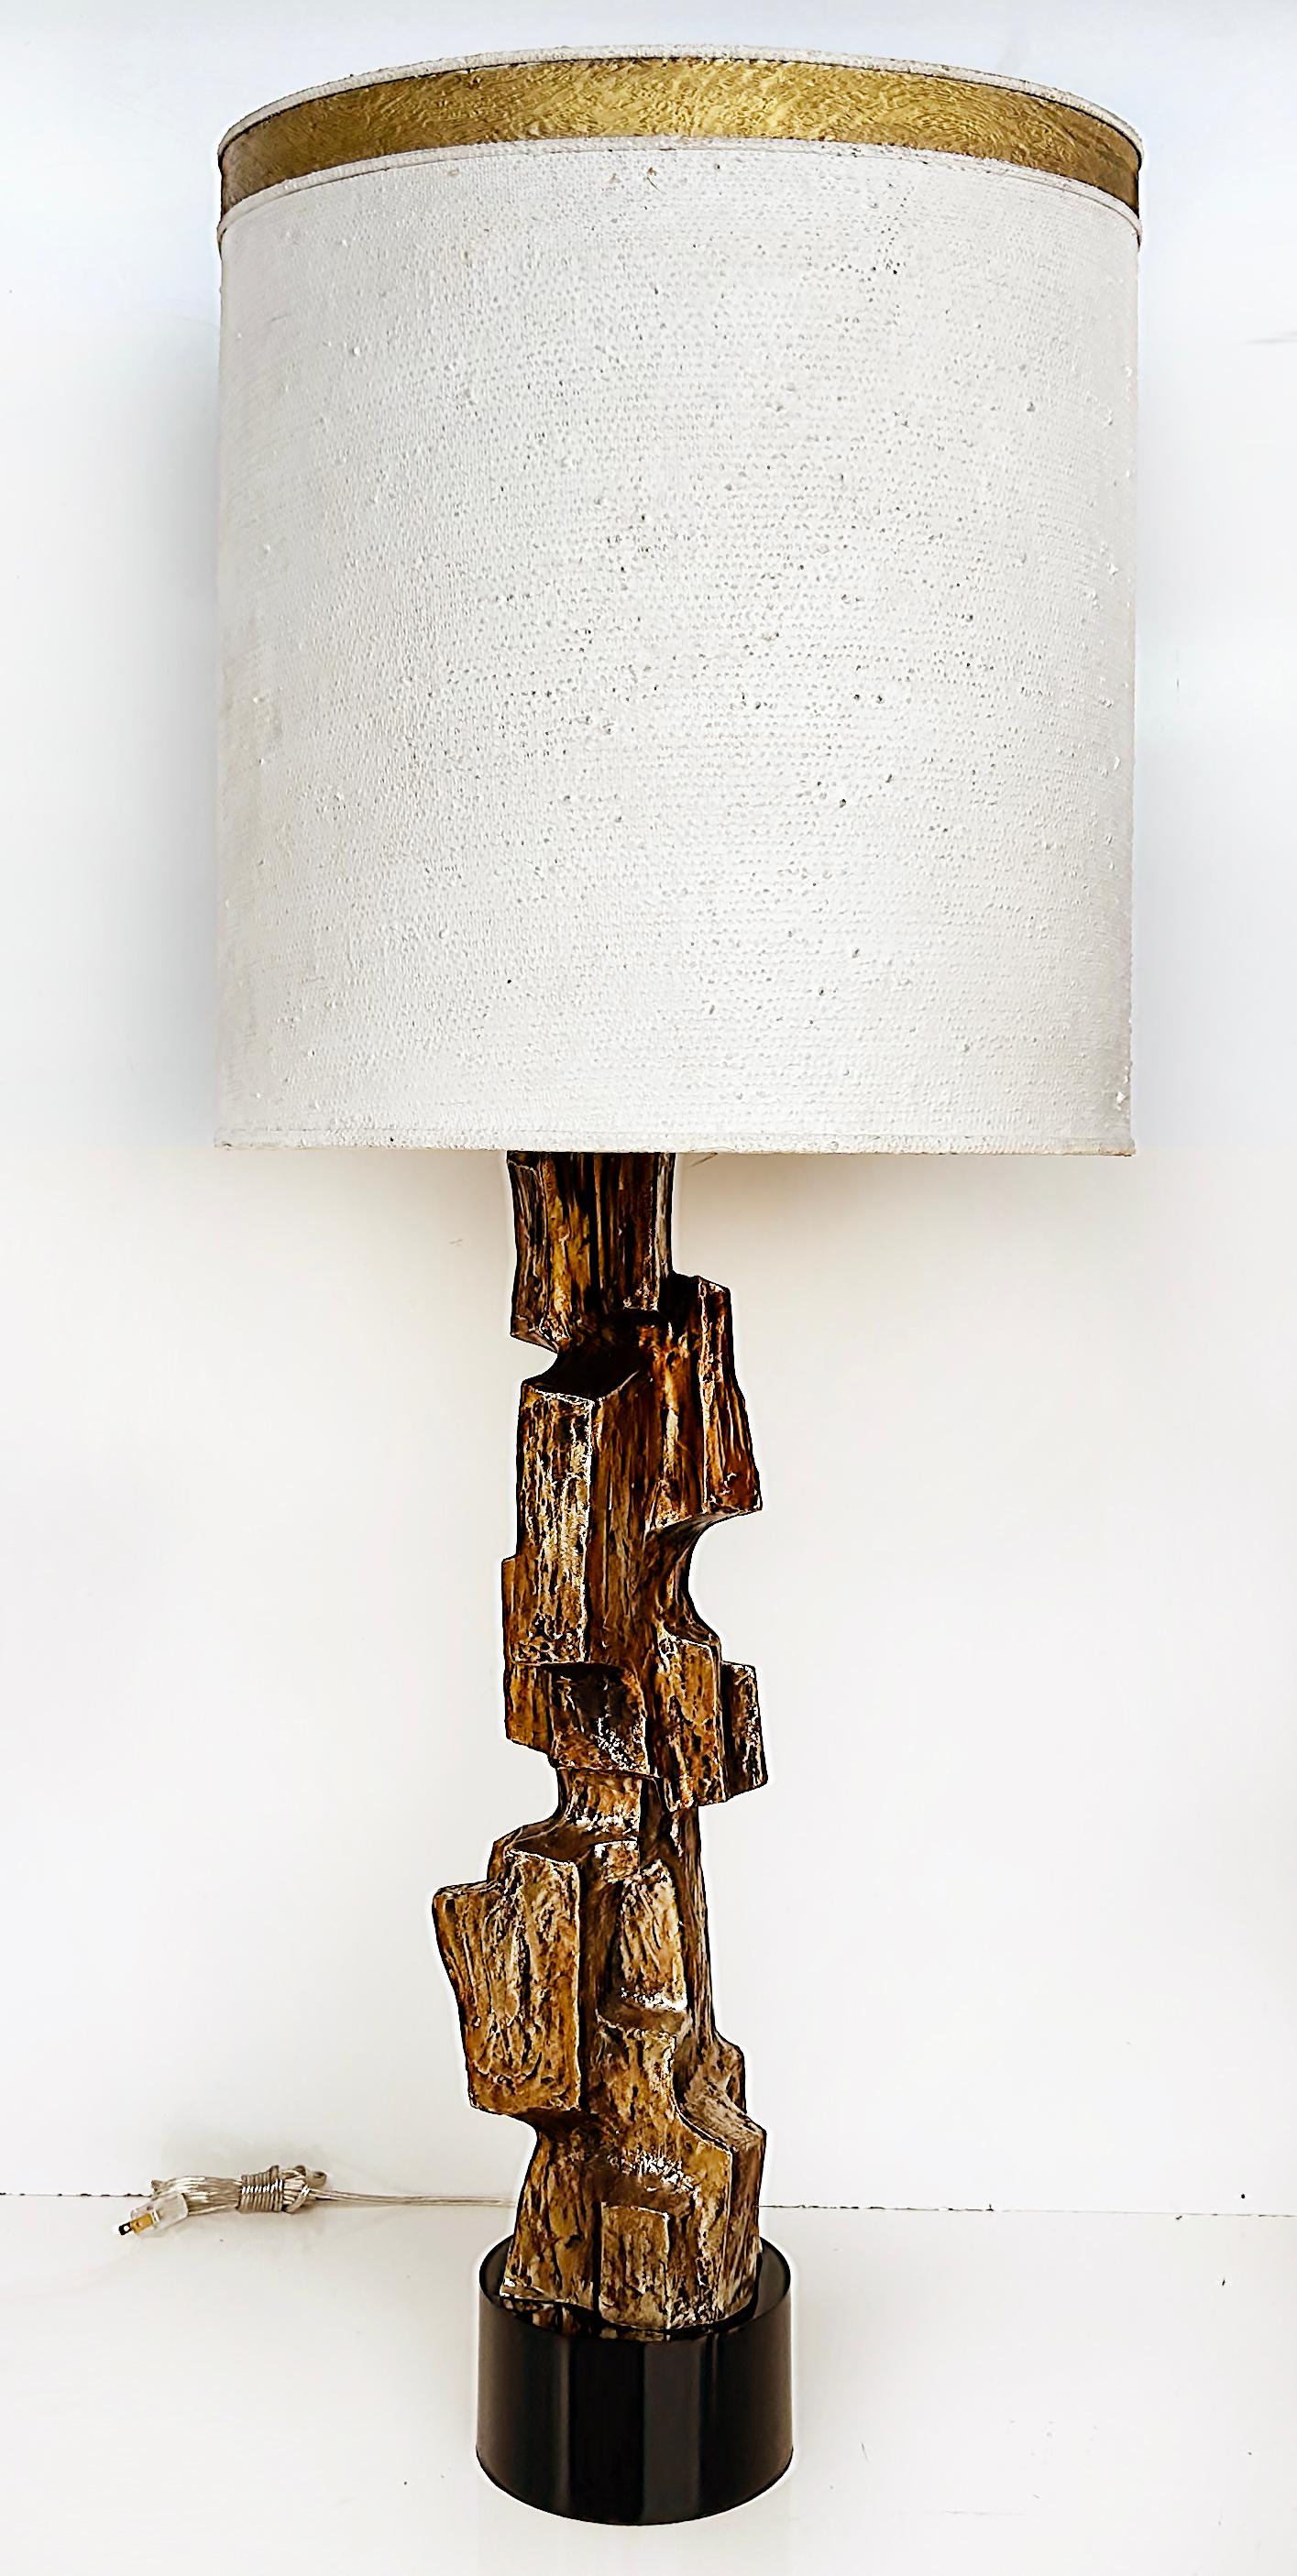 Monumental Tall Richard Barr Brutalist Laurel Table Lamps, restored pair

Offered for sale is a fabulous pair of mid-century modern sculptural Brutalist table lamps designed by Richard Barr for Laurel Lamp Company circa the 1970s.  These amazing